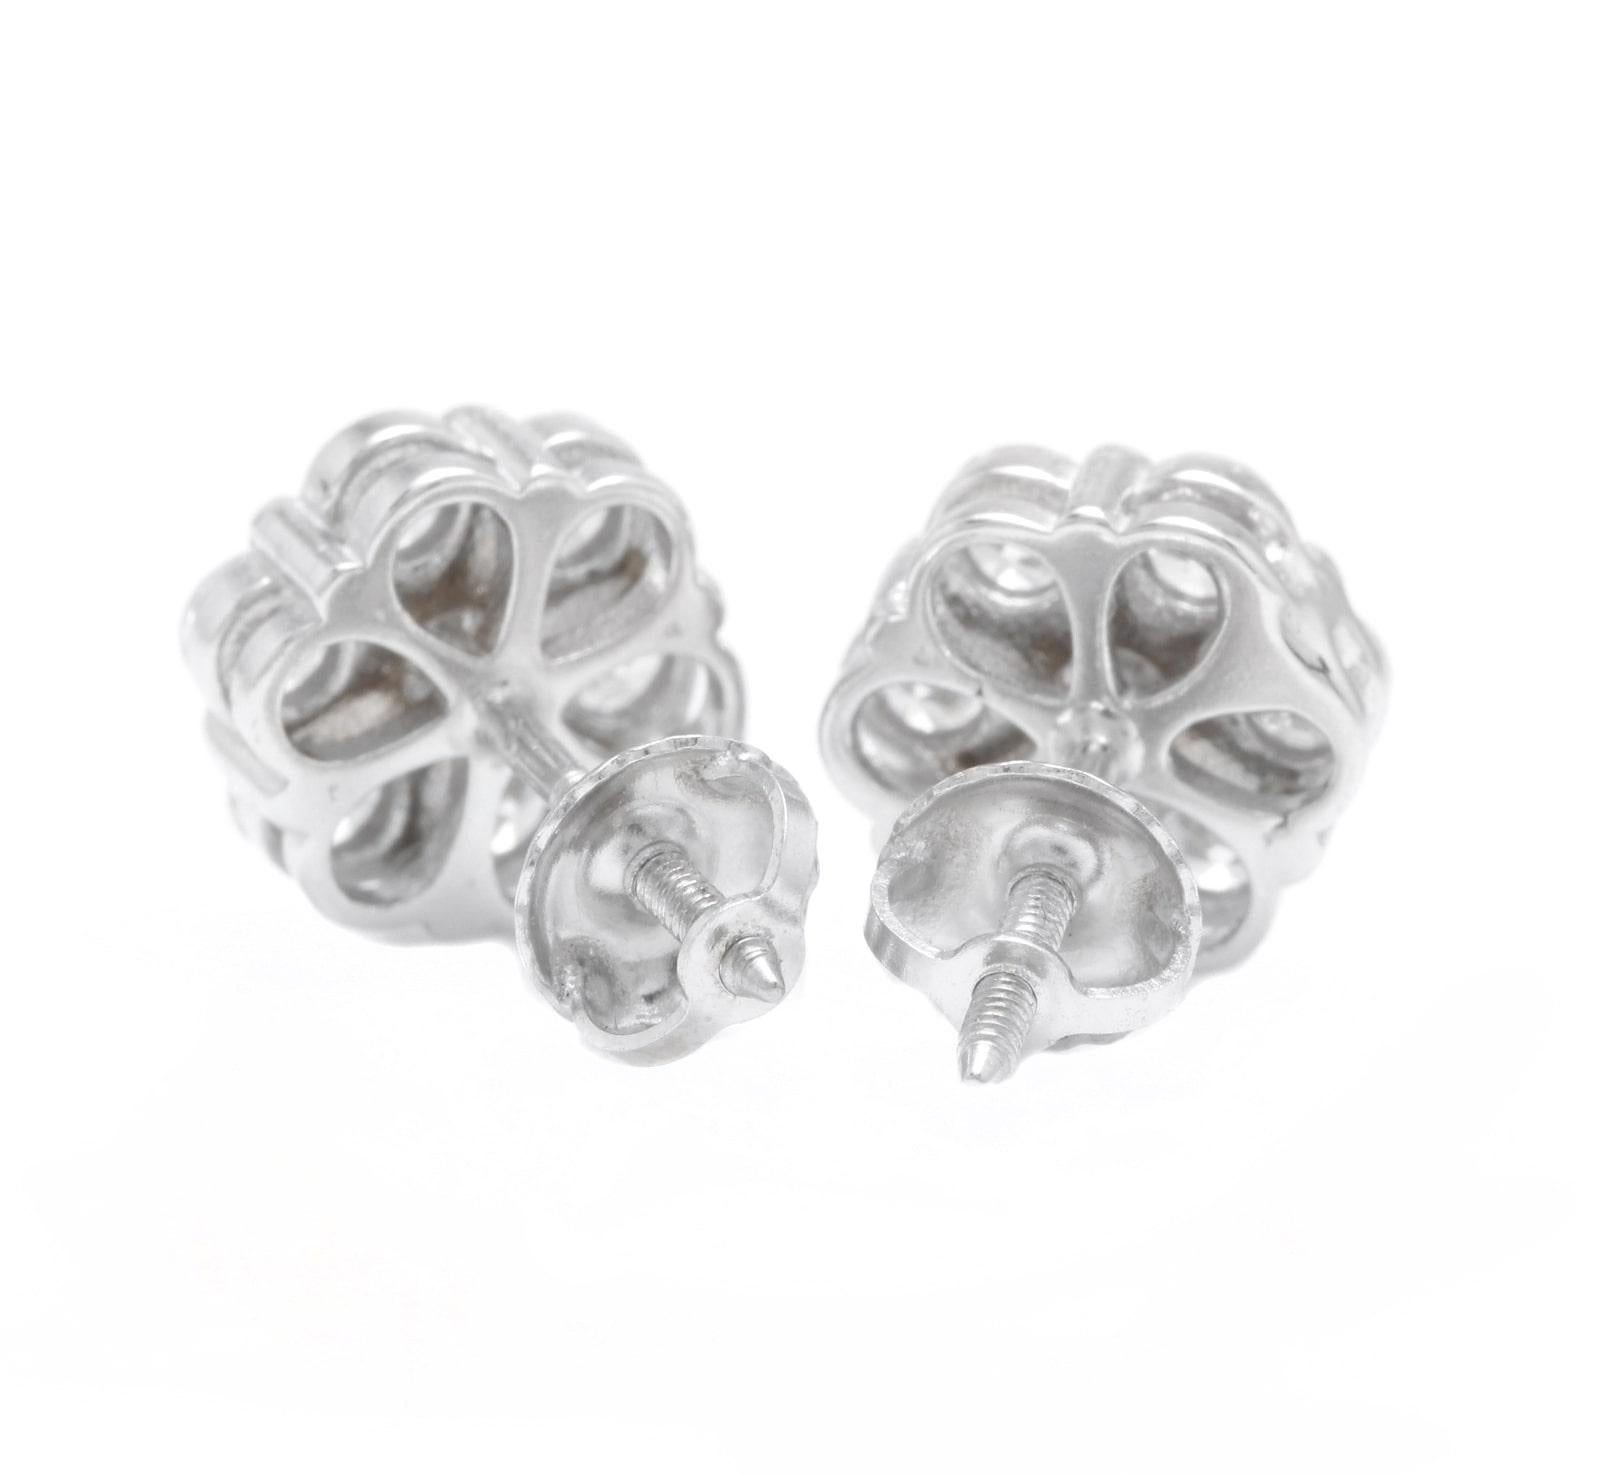 Round Cut Exquisite 1.40 Carats Natural Diamond 14K Solid White Gold Stud Earrings For Sale